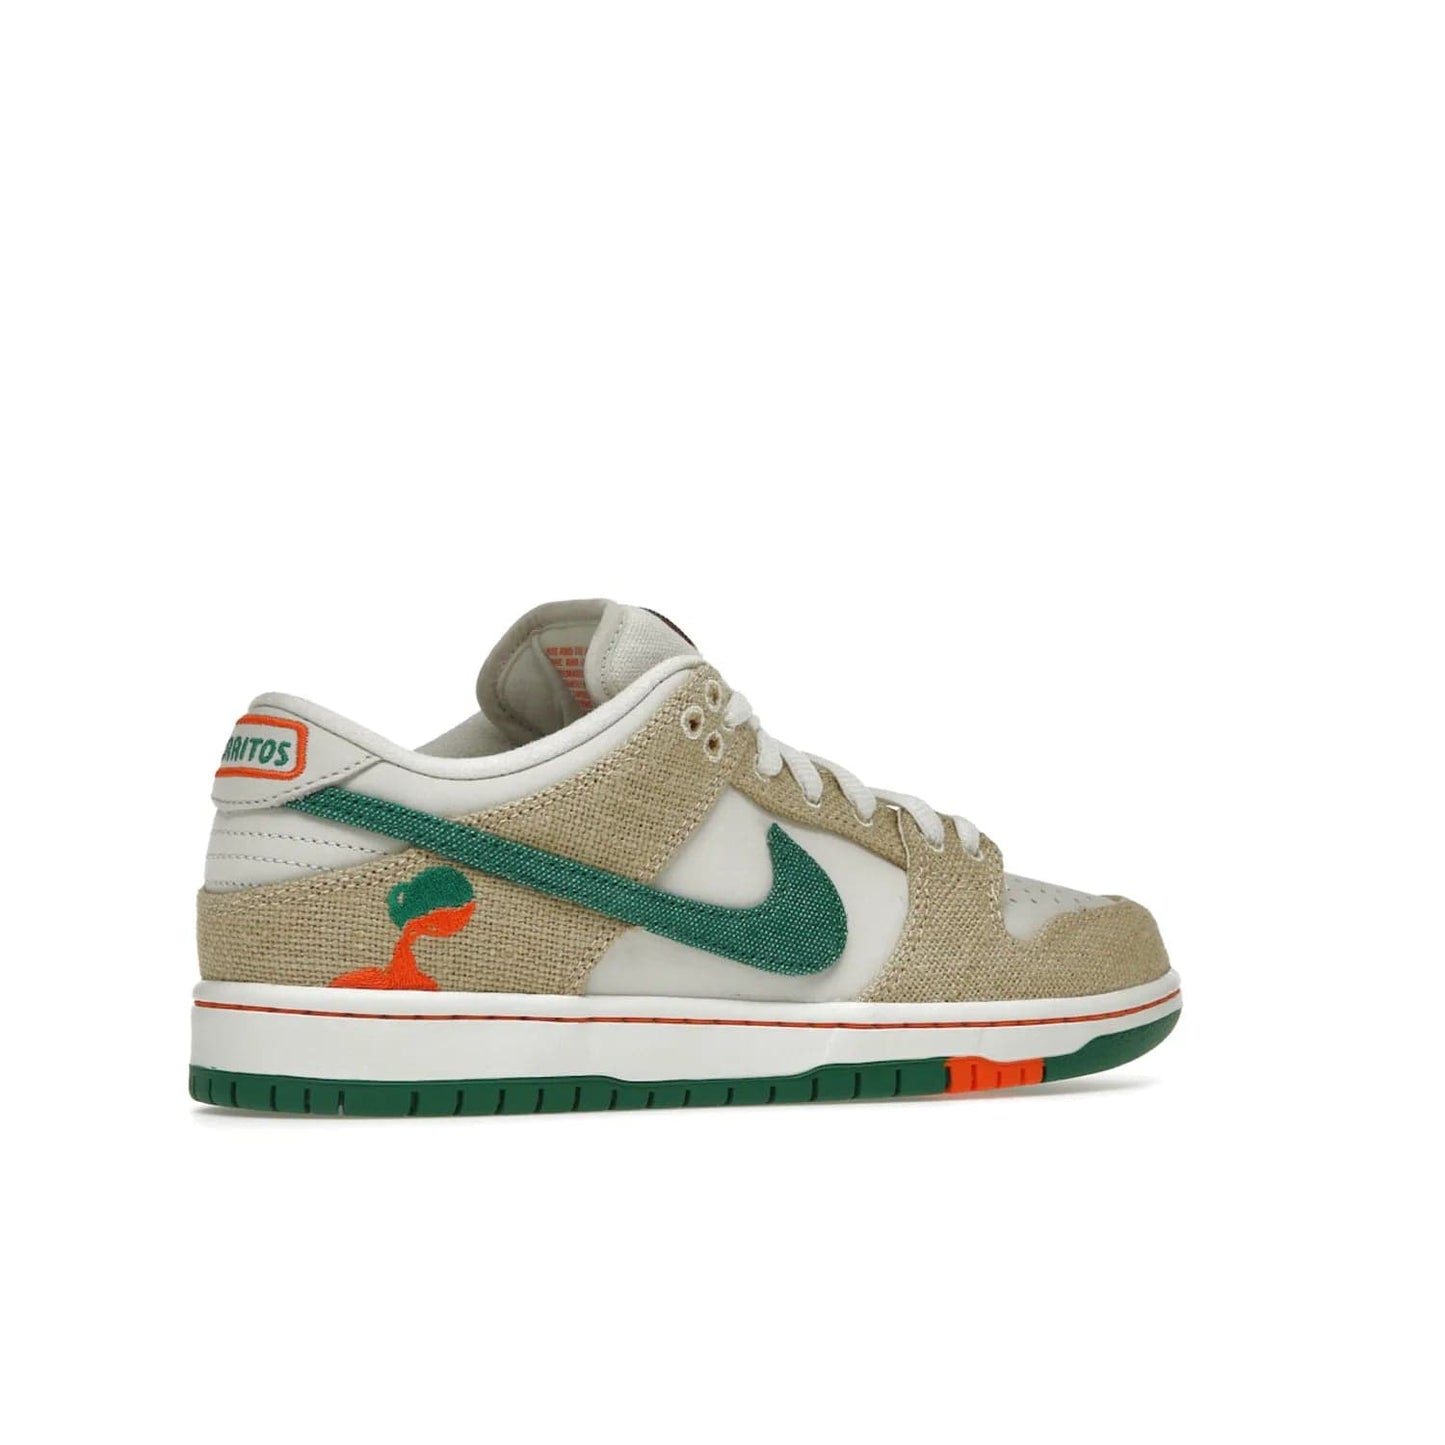 Nike SB Dunk Low Jarritos - Image 34 - Only at www.BallersClubKickz.com - Shop limited edition Nike SB Dunk Low Jarritos! Crafted with white leather and tear-away canvas materials with green accents. Includes orange, green, and white laces to customize your look. Available now.